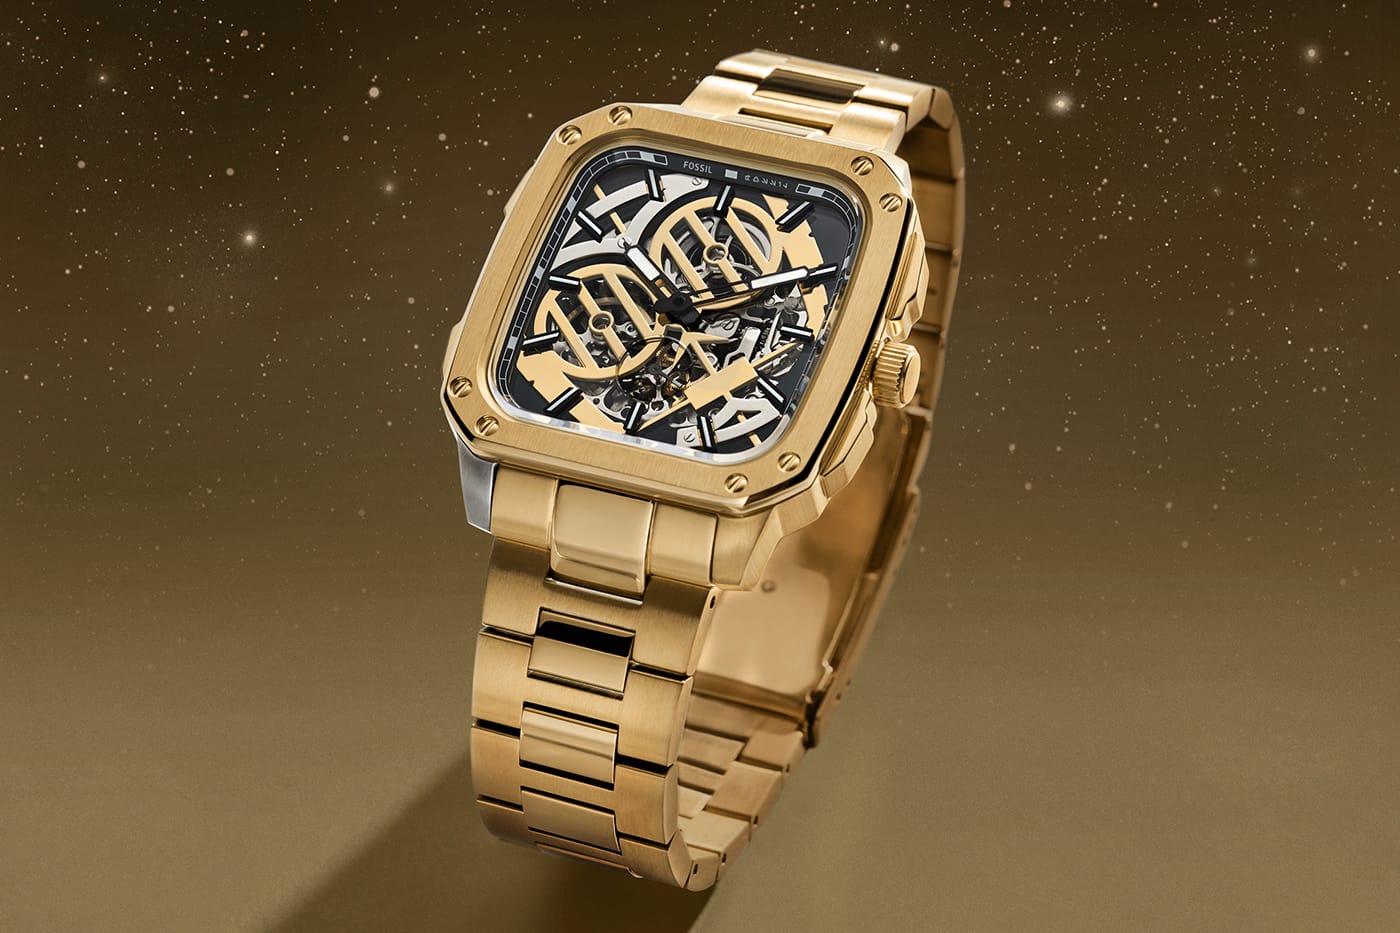 Fossil 'Star Wars' Watch Collaboration Release | Hypebeast